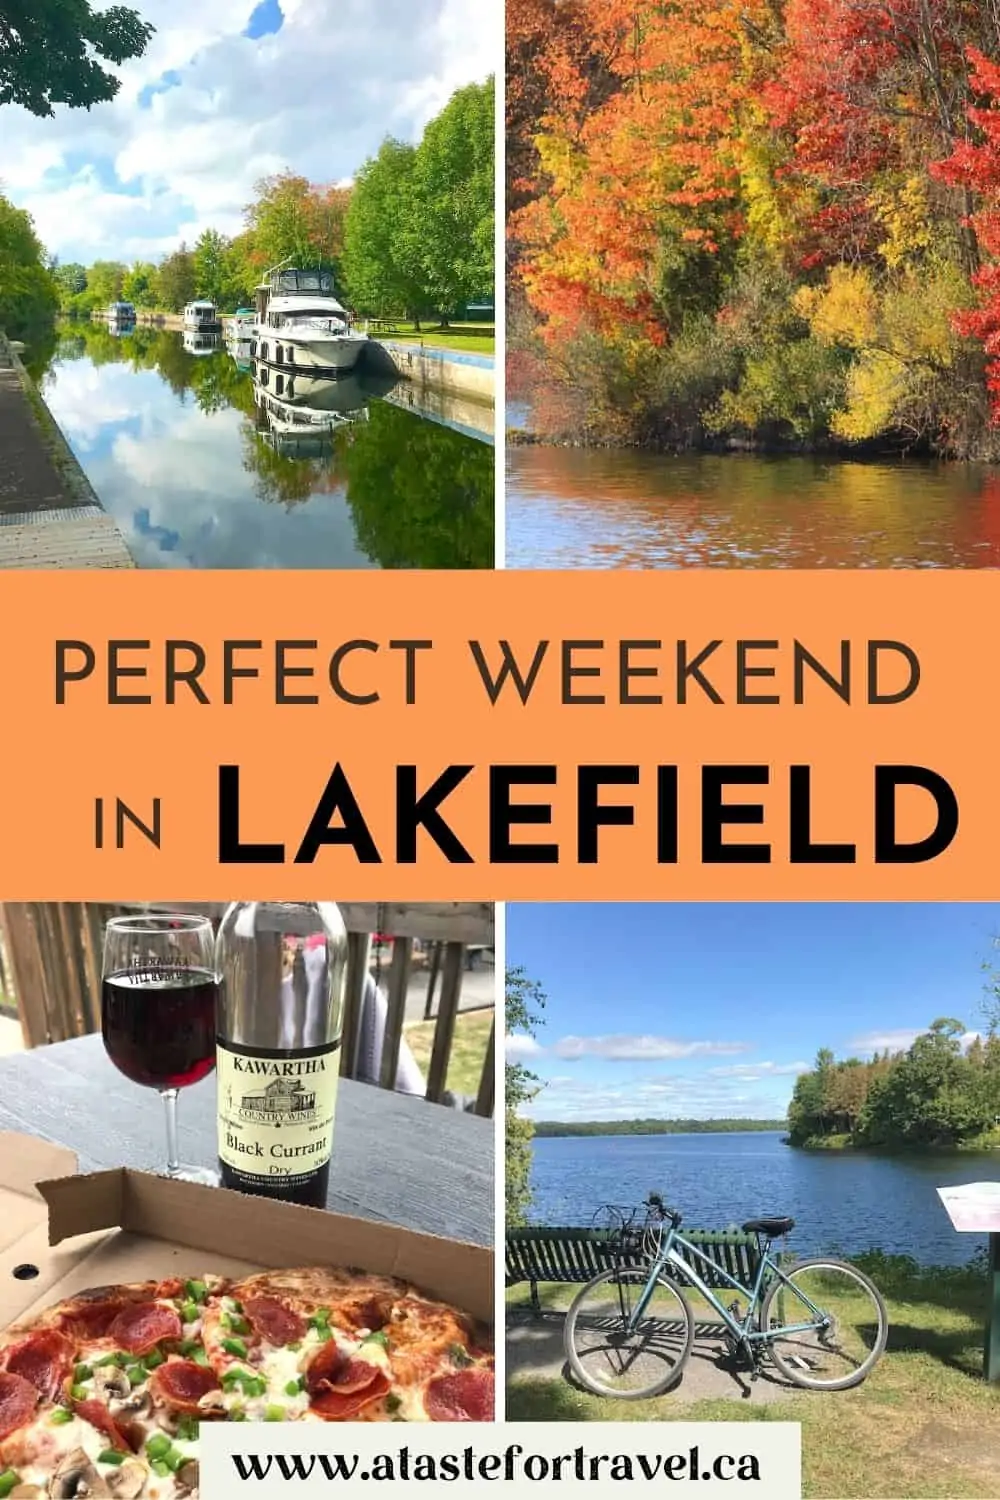 Collage of images of Lakefield for Pinterest.